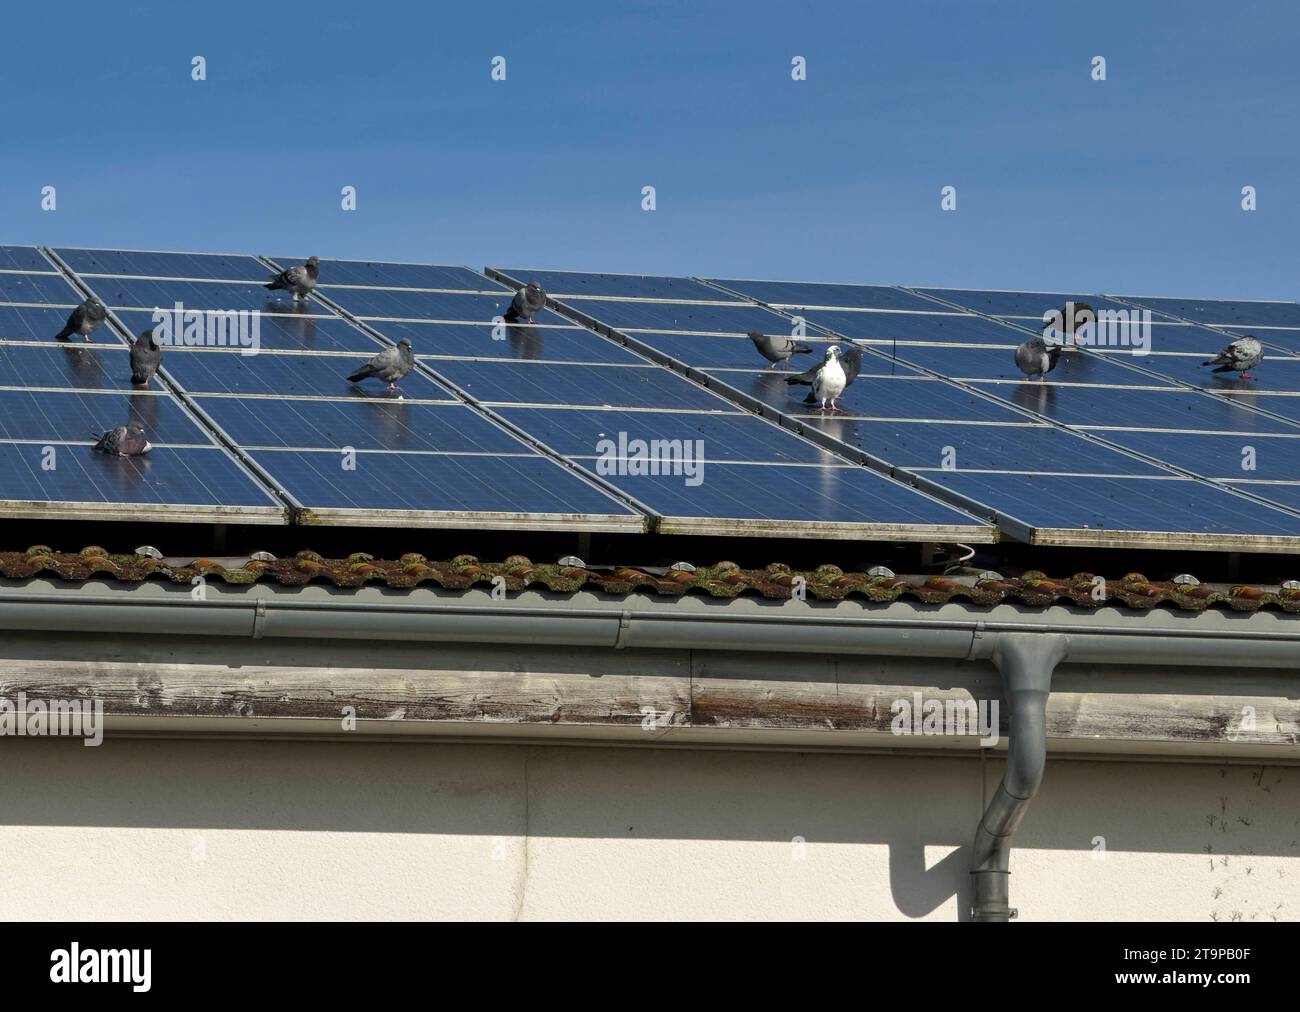 Pigeon on a photovoltaik roof in Marktoberdorf, Germania, 16 ottobre 2023. Credito: Imago/Alamy Live News Foto Stock